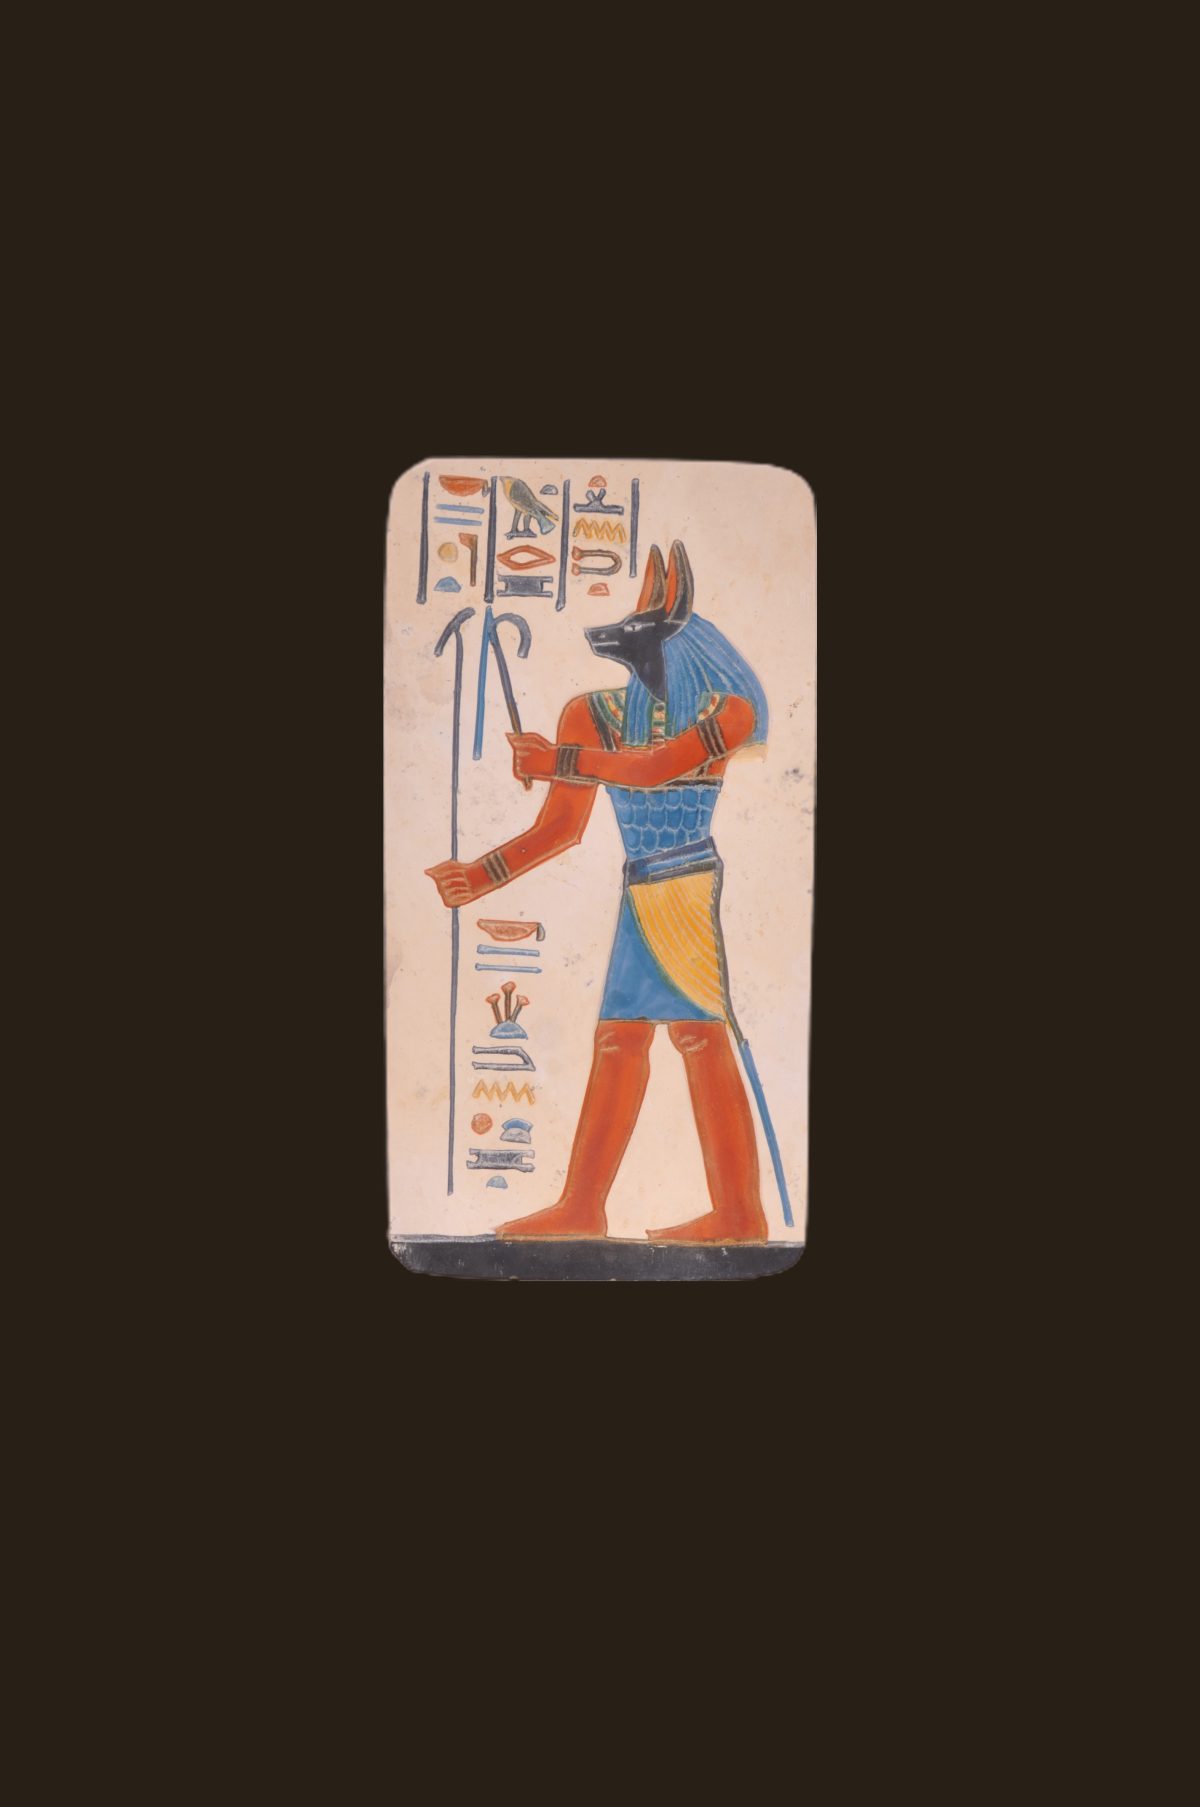 Stone plate graving representing Anubis the ancient egyptian God with heliographic letters